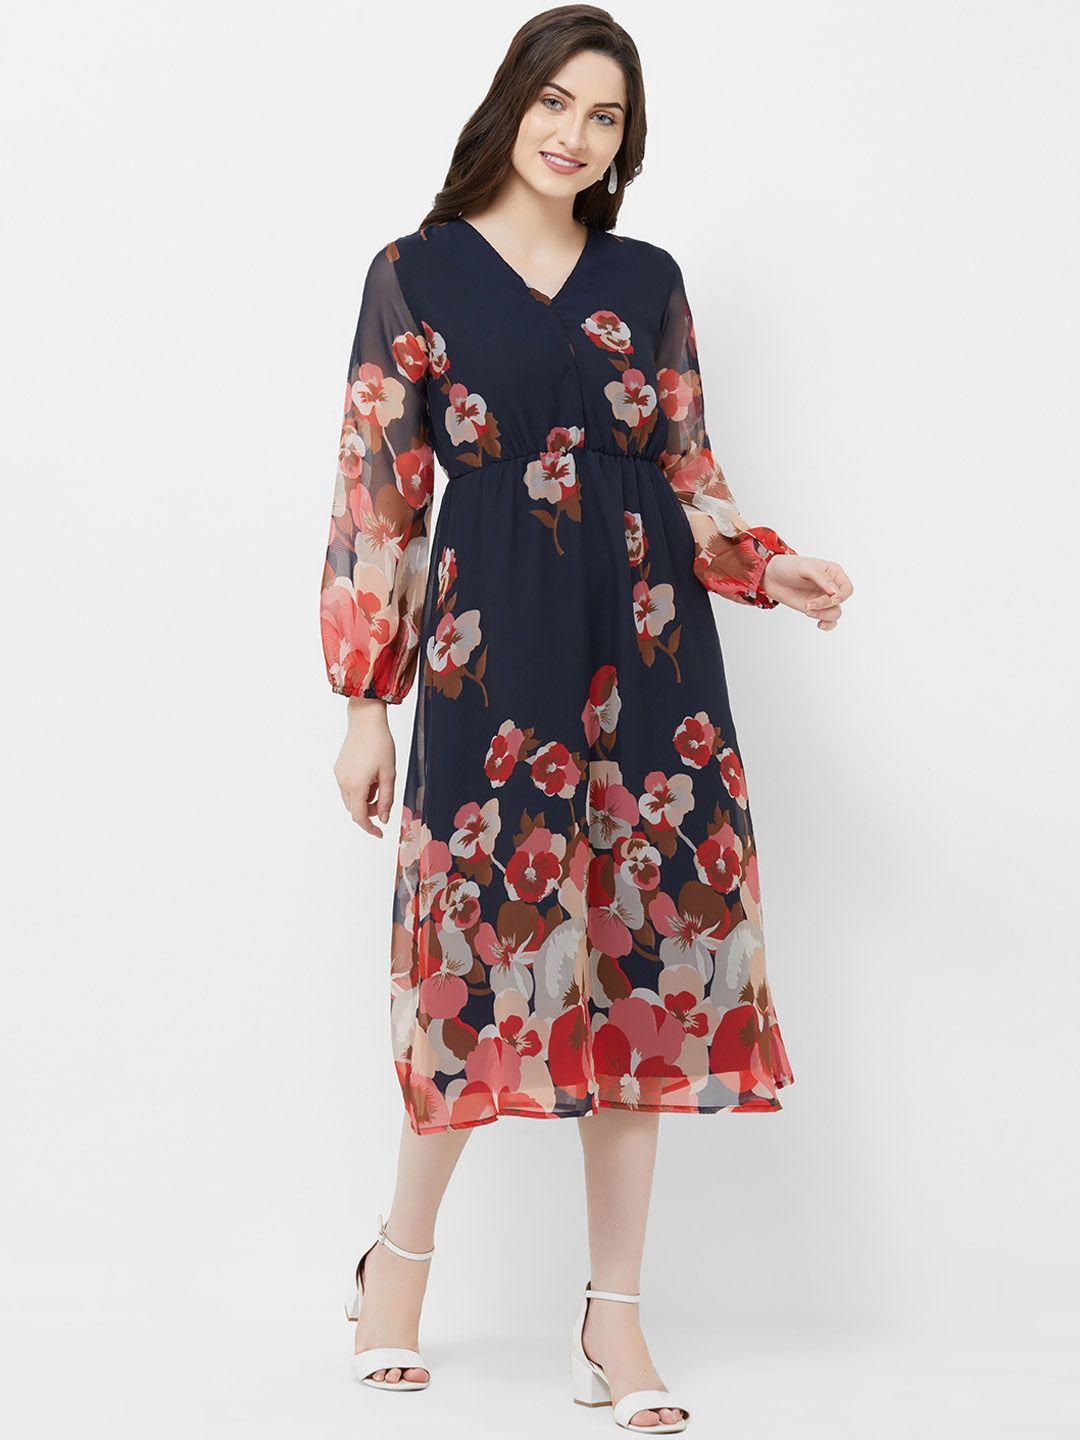 mish-women-navy-blue-floral-print-georgette-fit-and-flare-dress